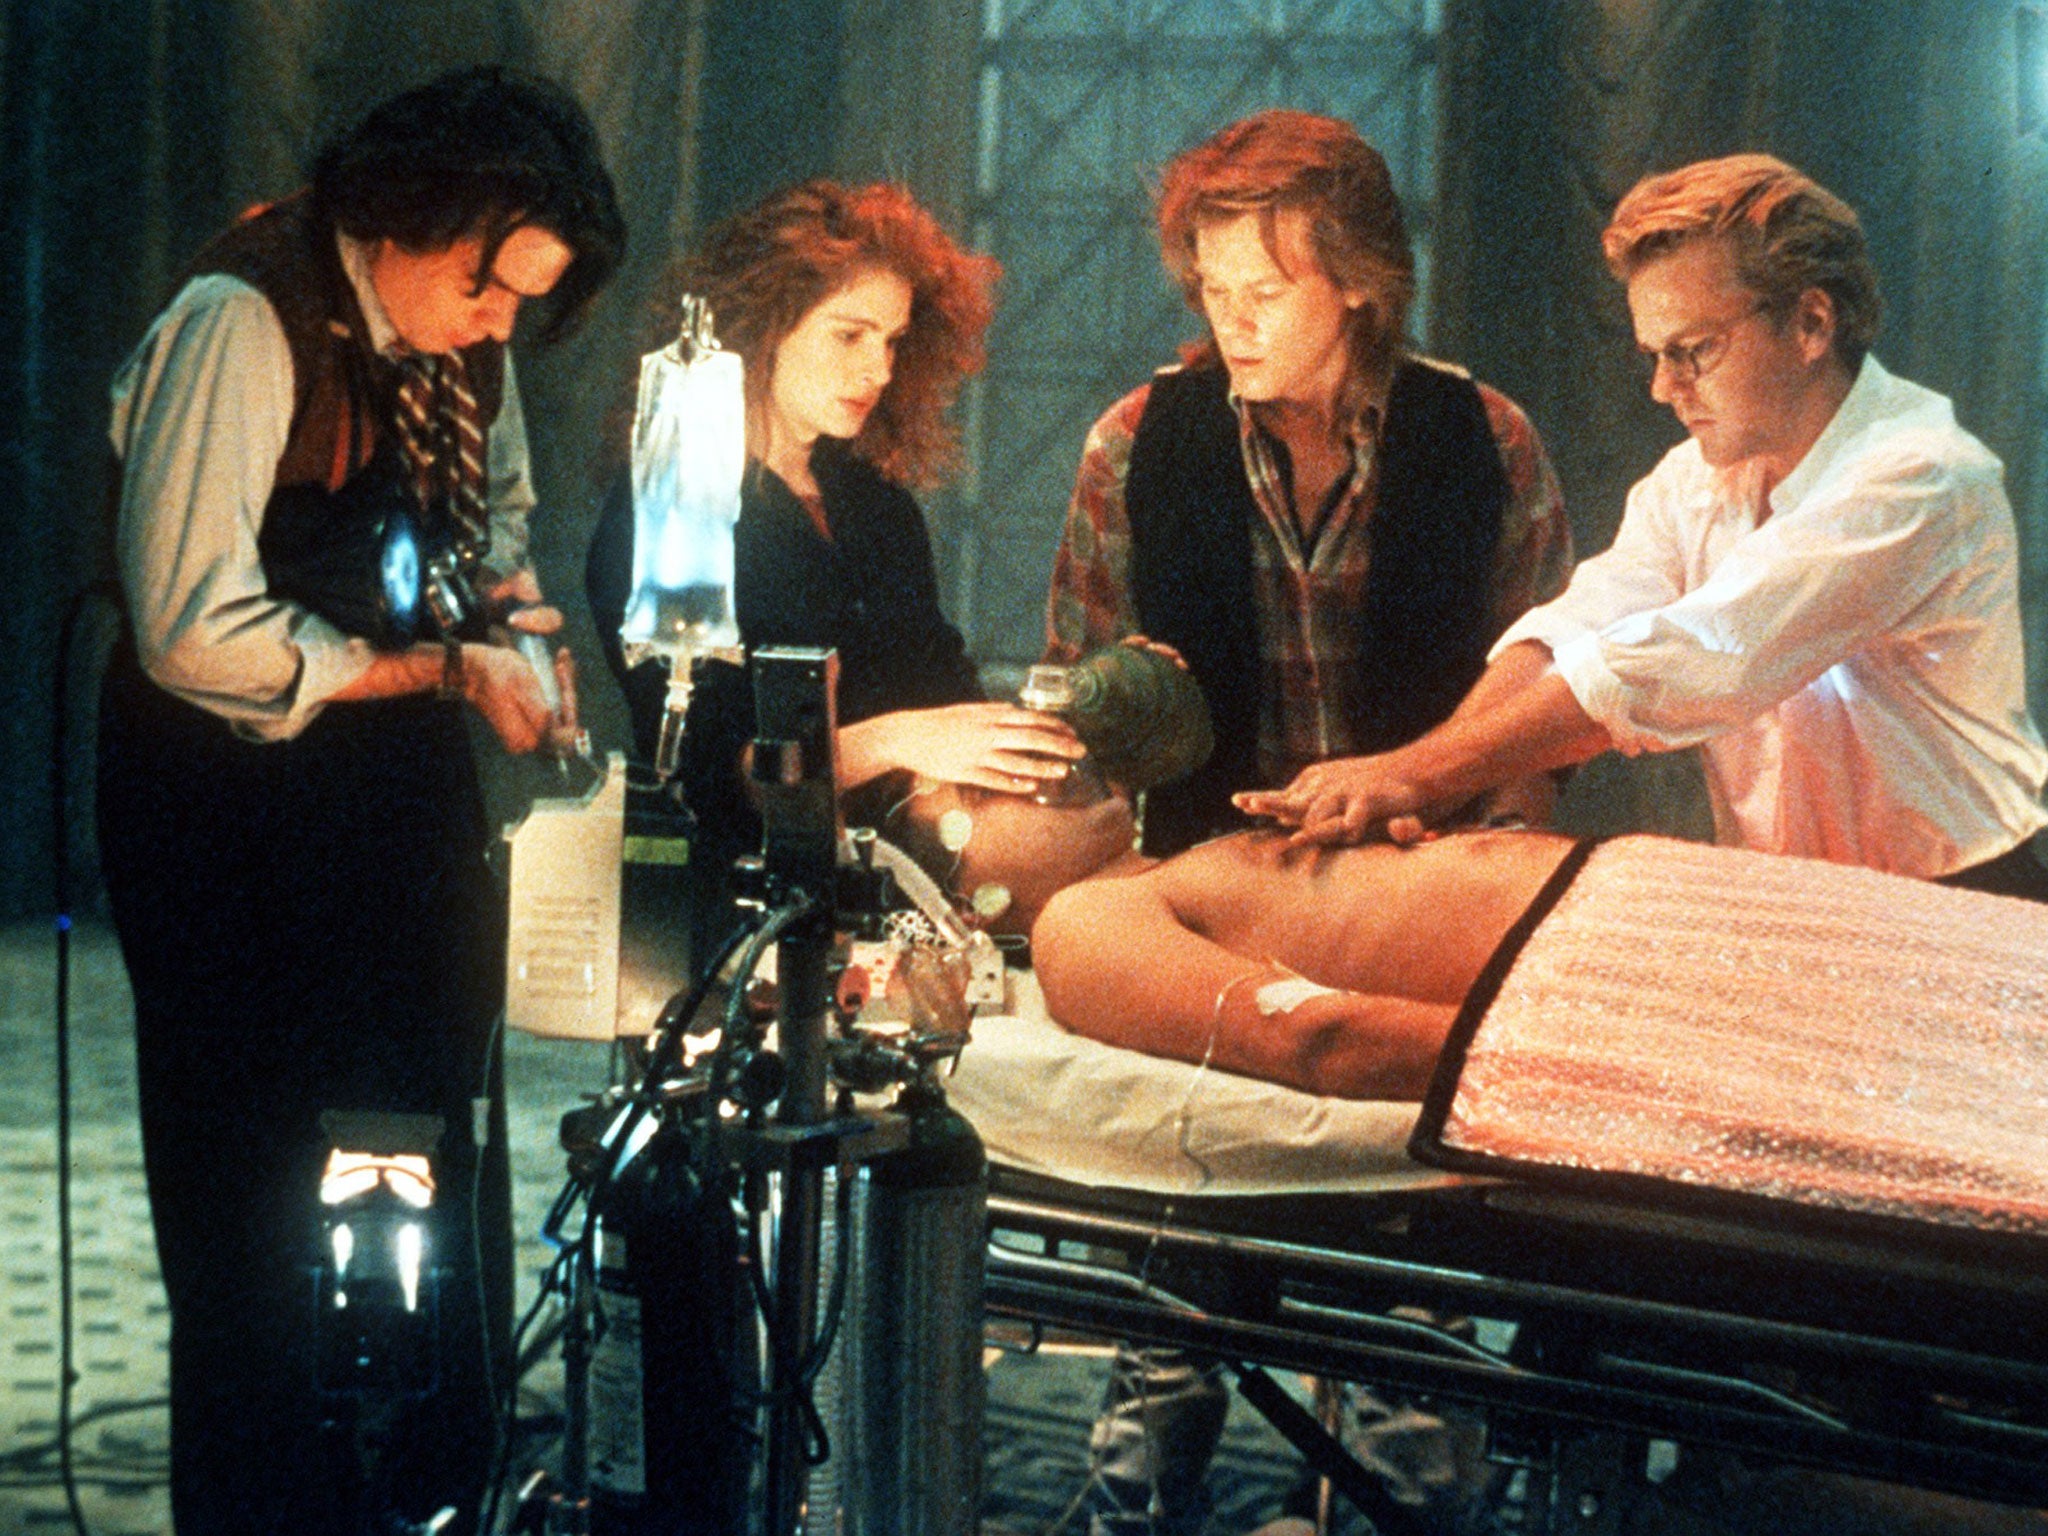 The topic of near death experiences was explored in the film Flatliners